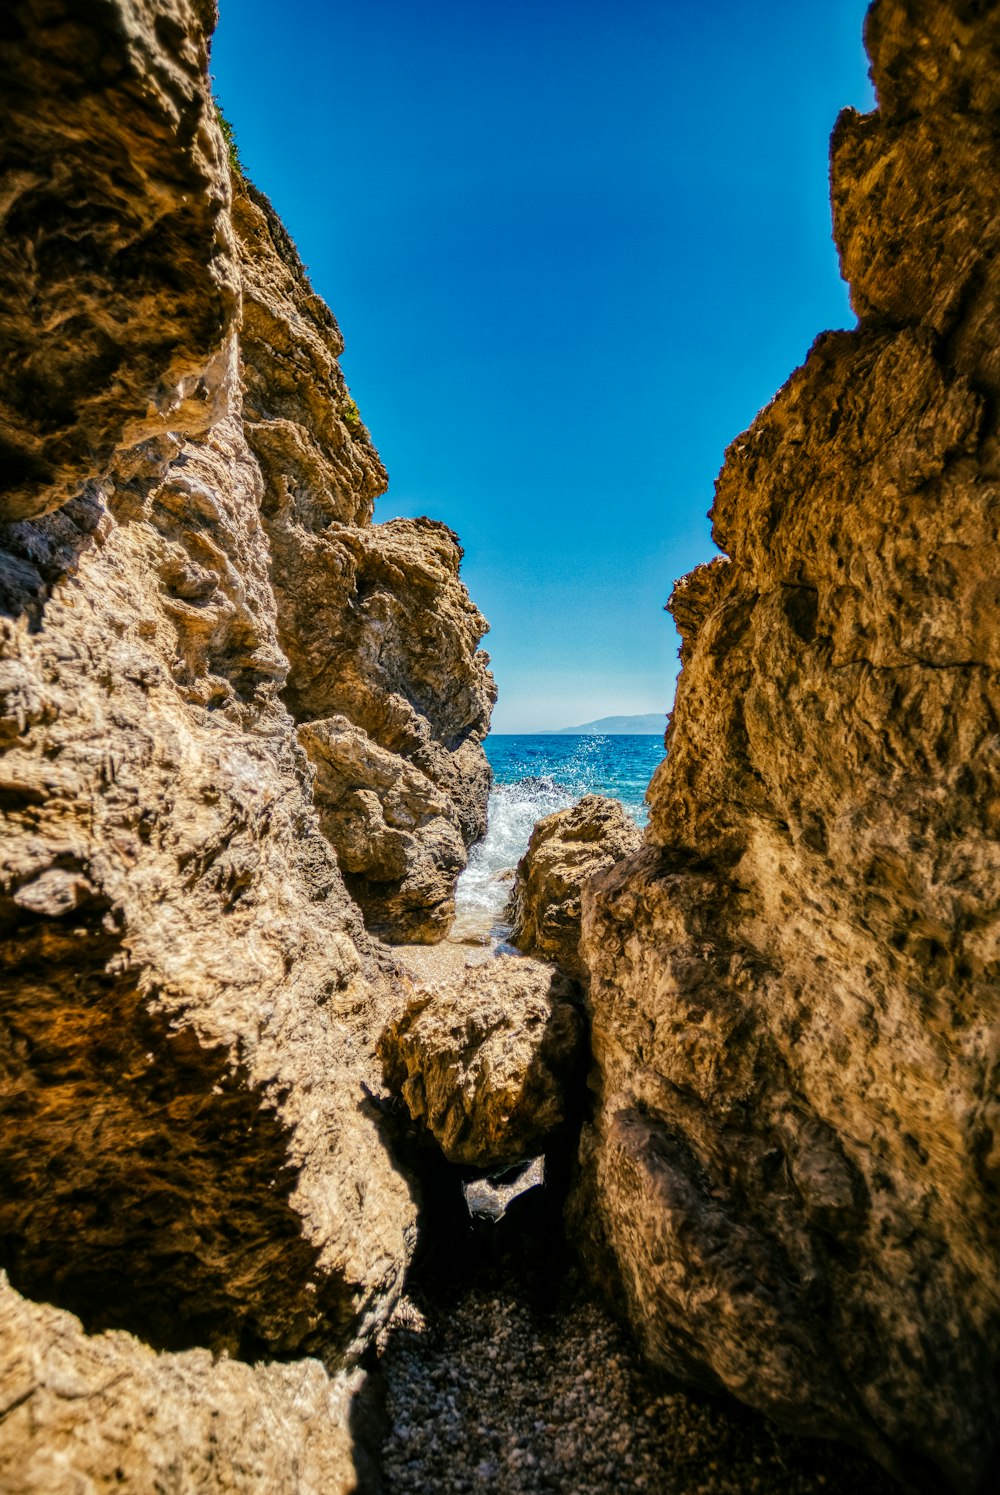 a view of the ocean through some rocks